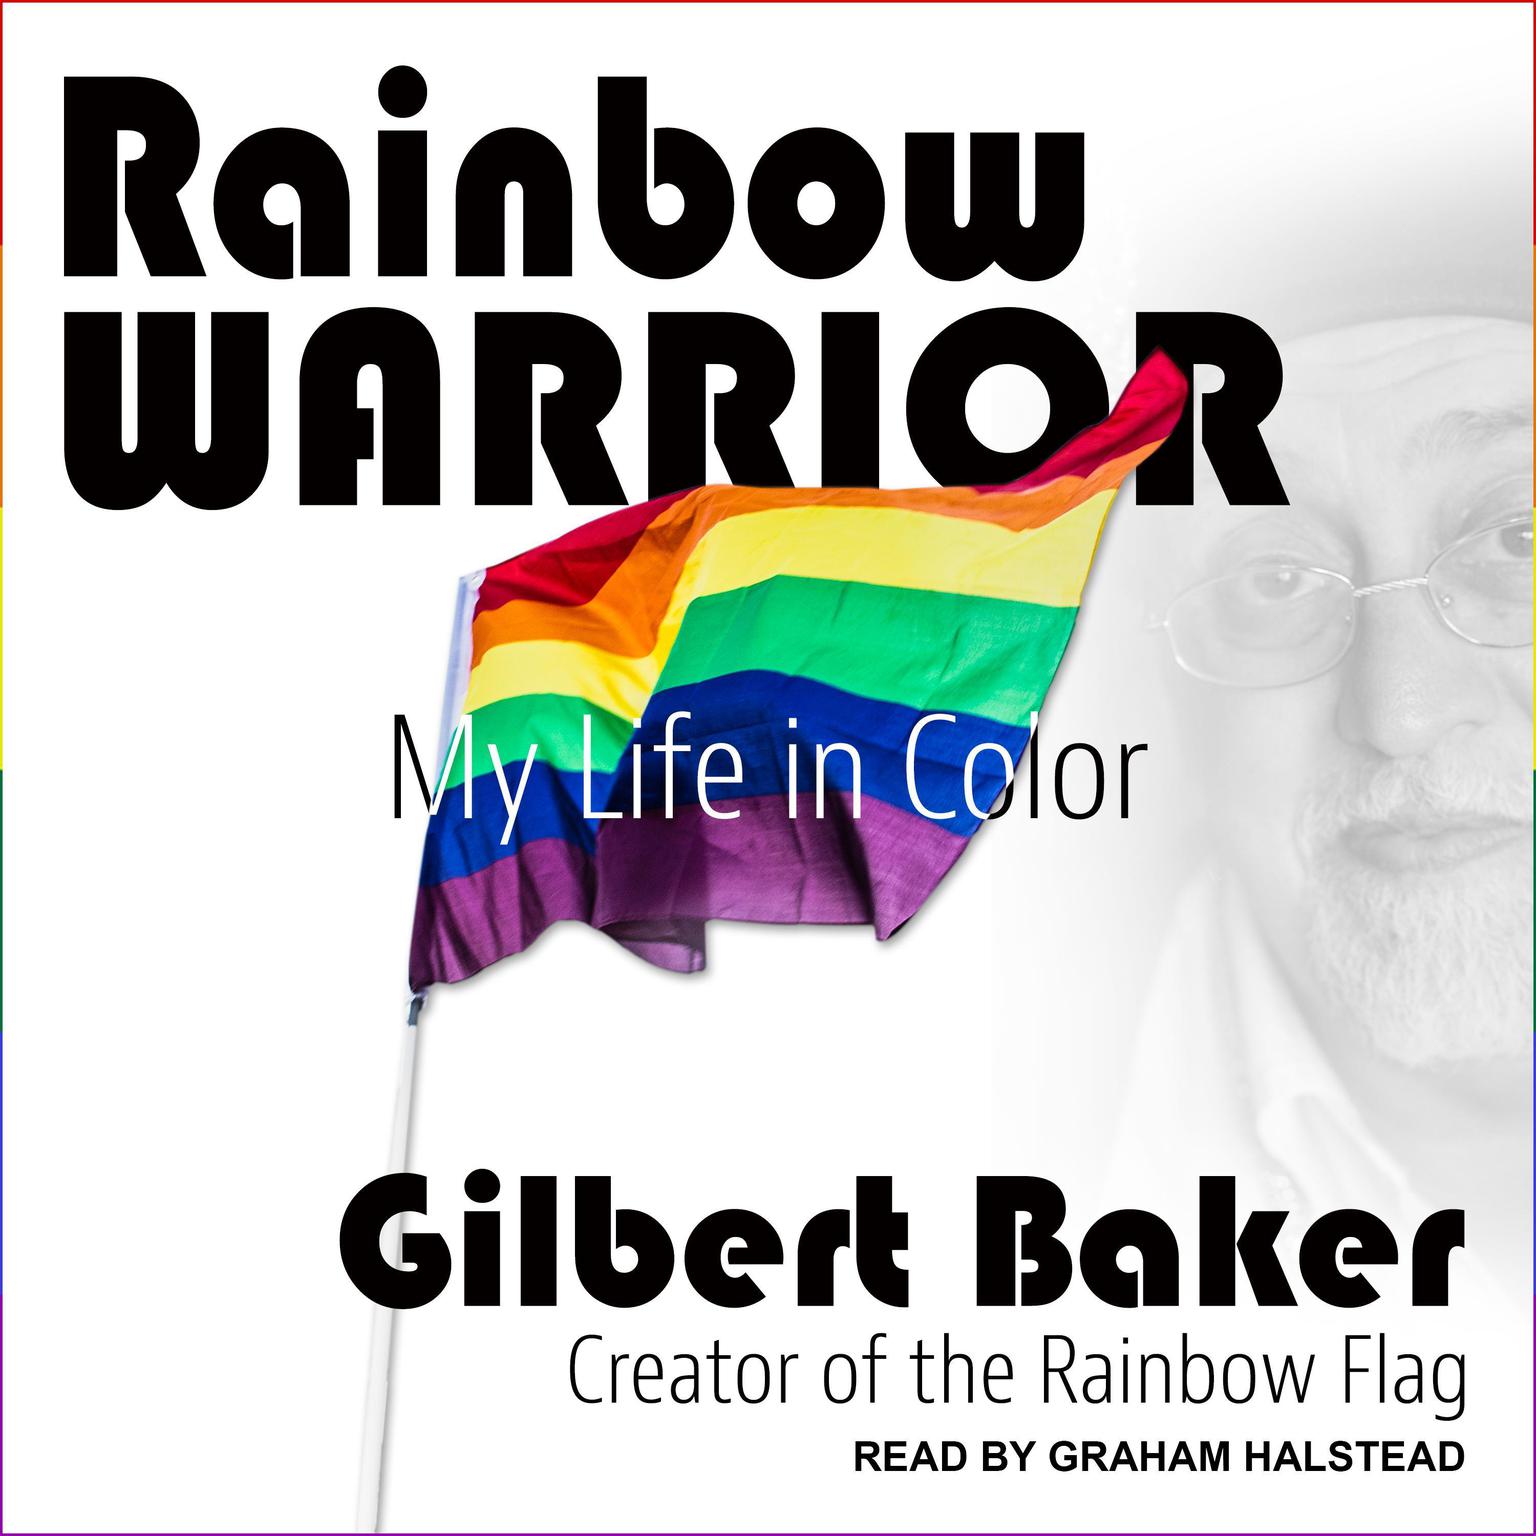 Rainbow Warrior: My Life in Color Audiobook, by Gilbert Baker